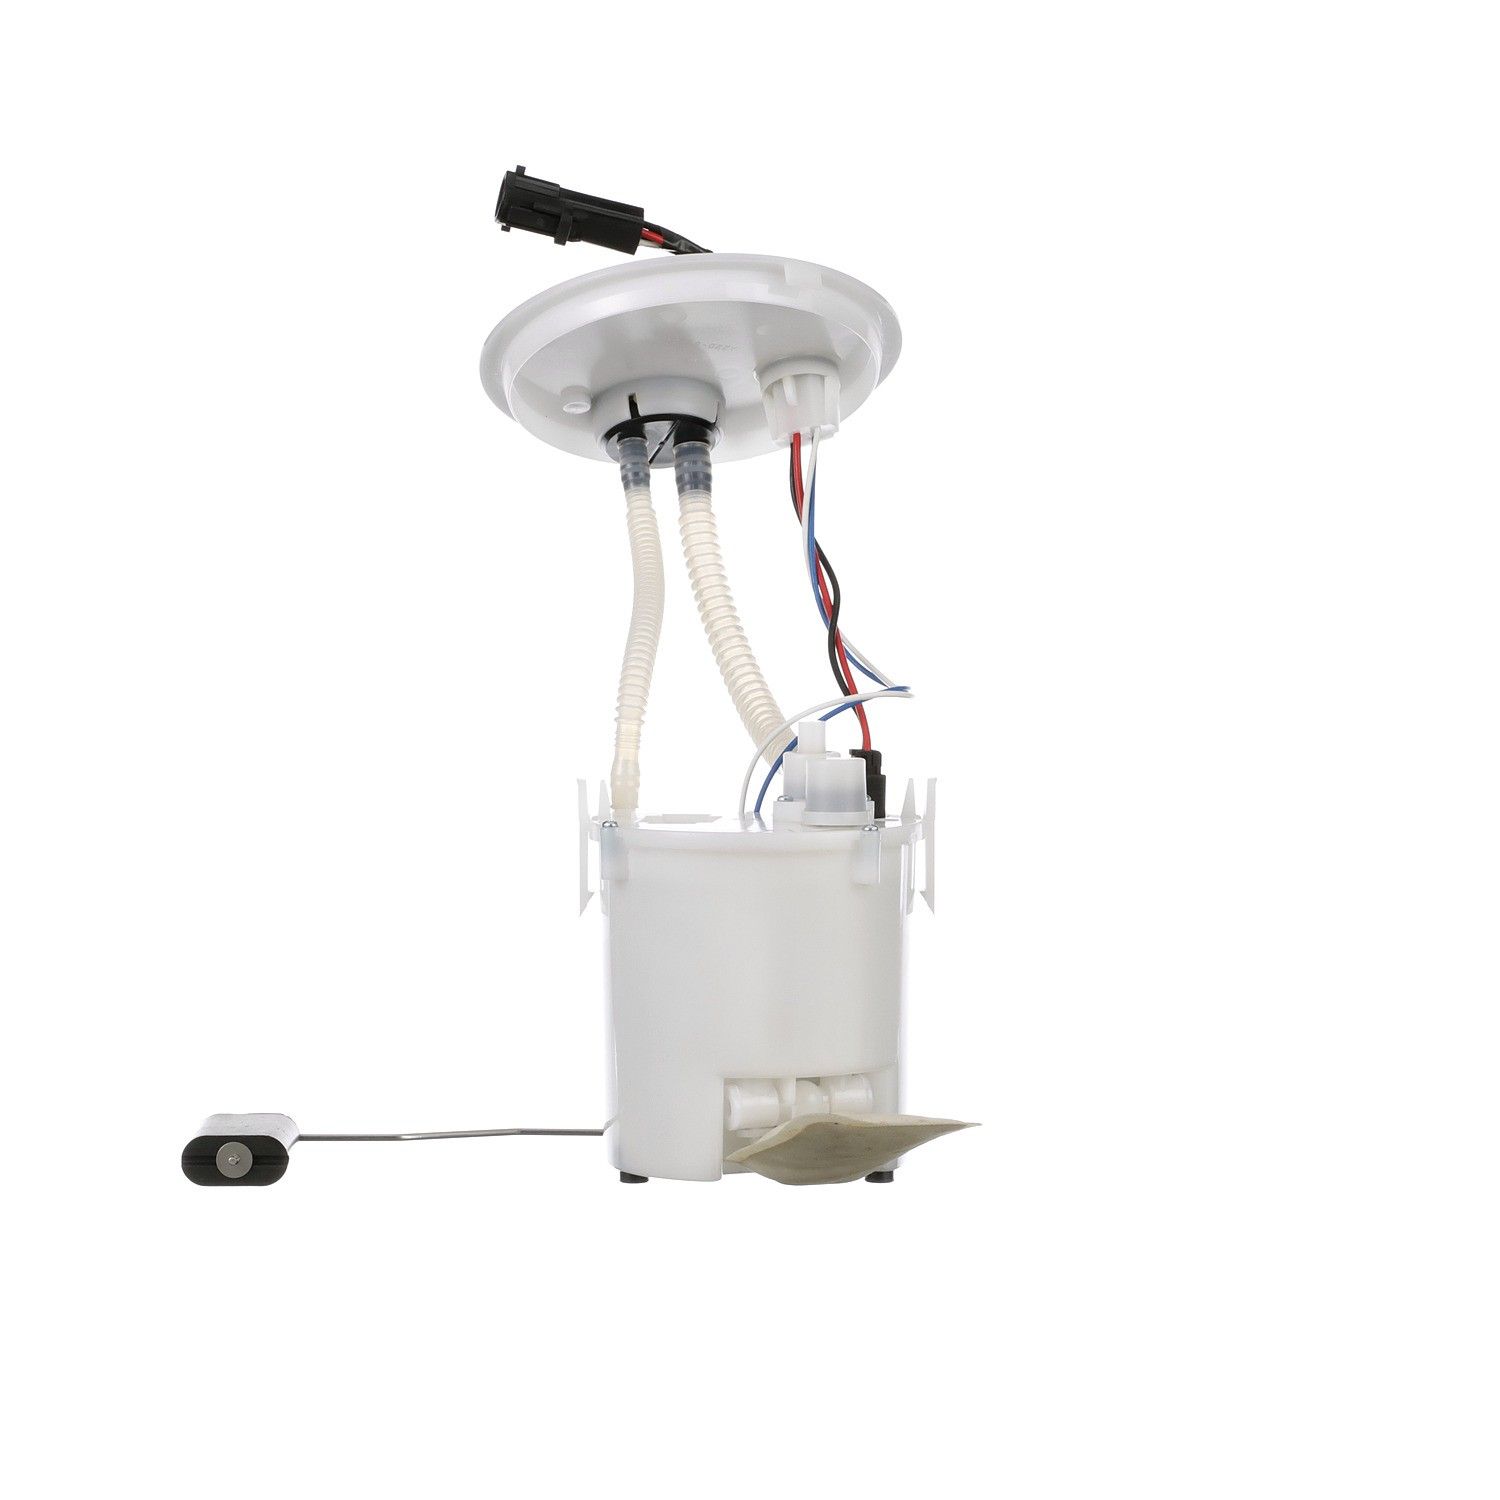 One New URO Electric Fuel Pump XR822164 for Jaguar S-Type